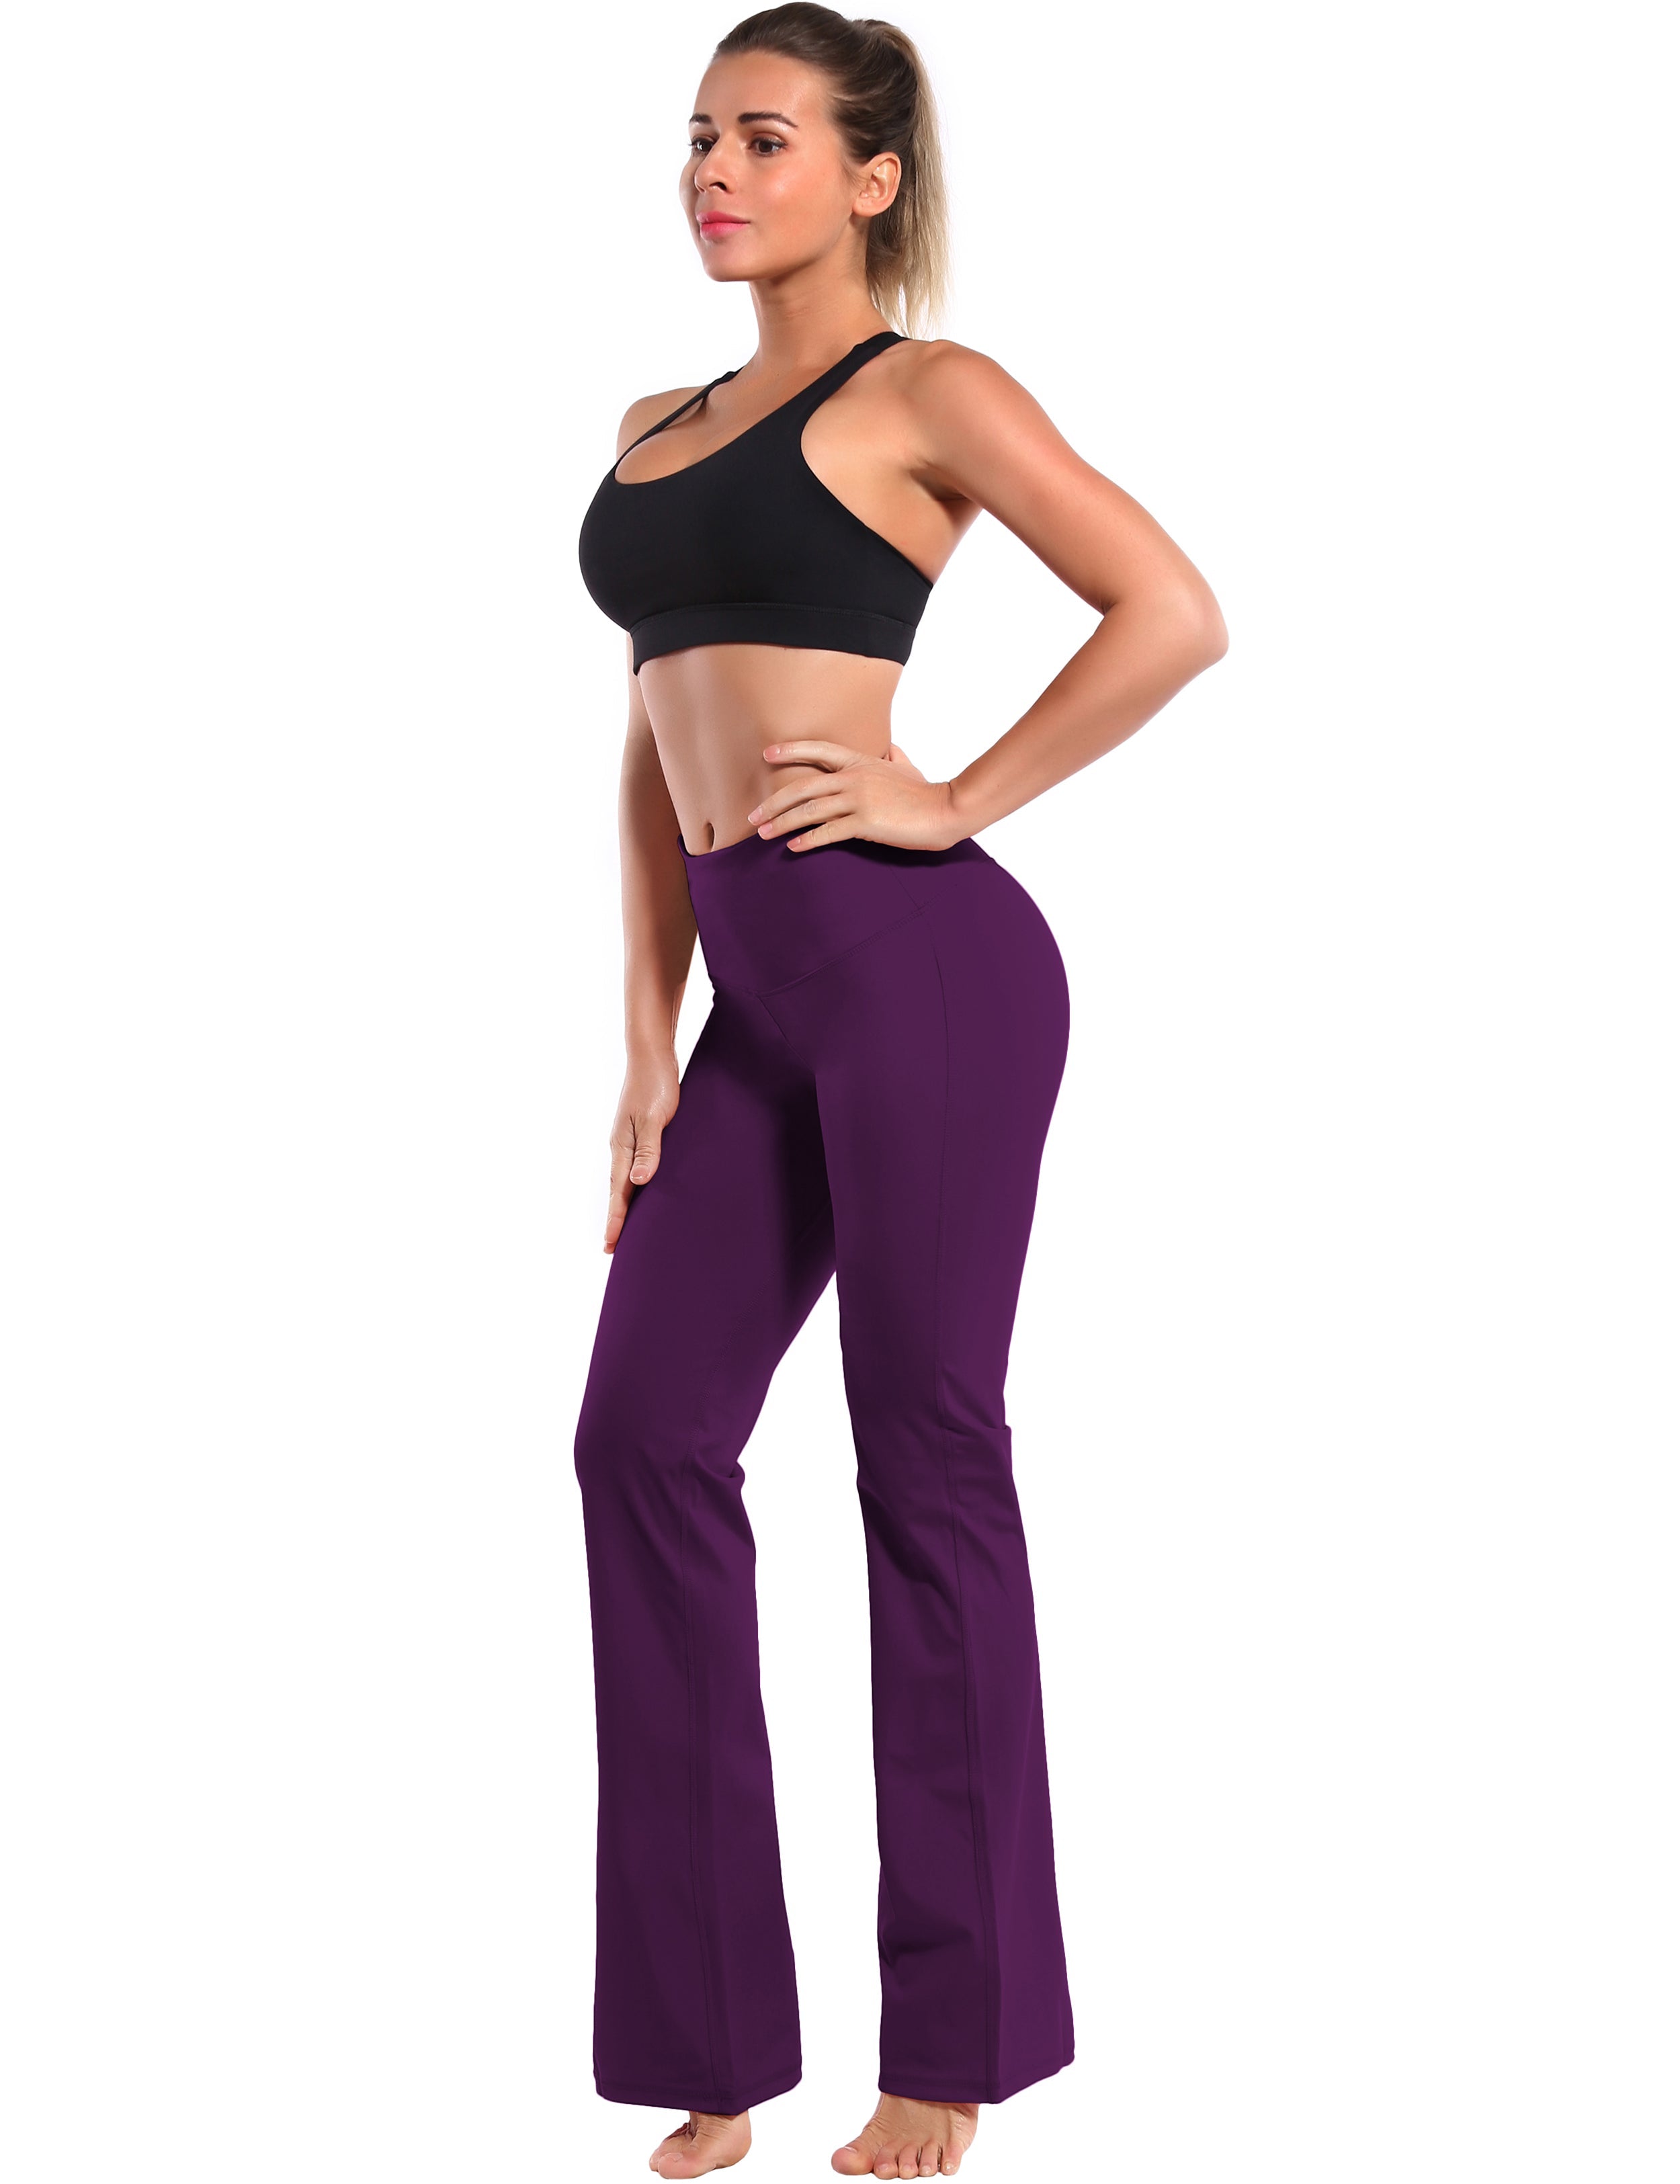 High Waist Bootcut Leggings Plum 75%Nylon/25%Spandex Fabric doesn't attract lint easily 4-way stretch No see-through Moisture-wicking Tummy control Inner pocket Five lengths